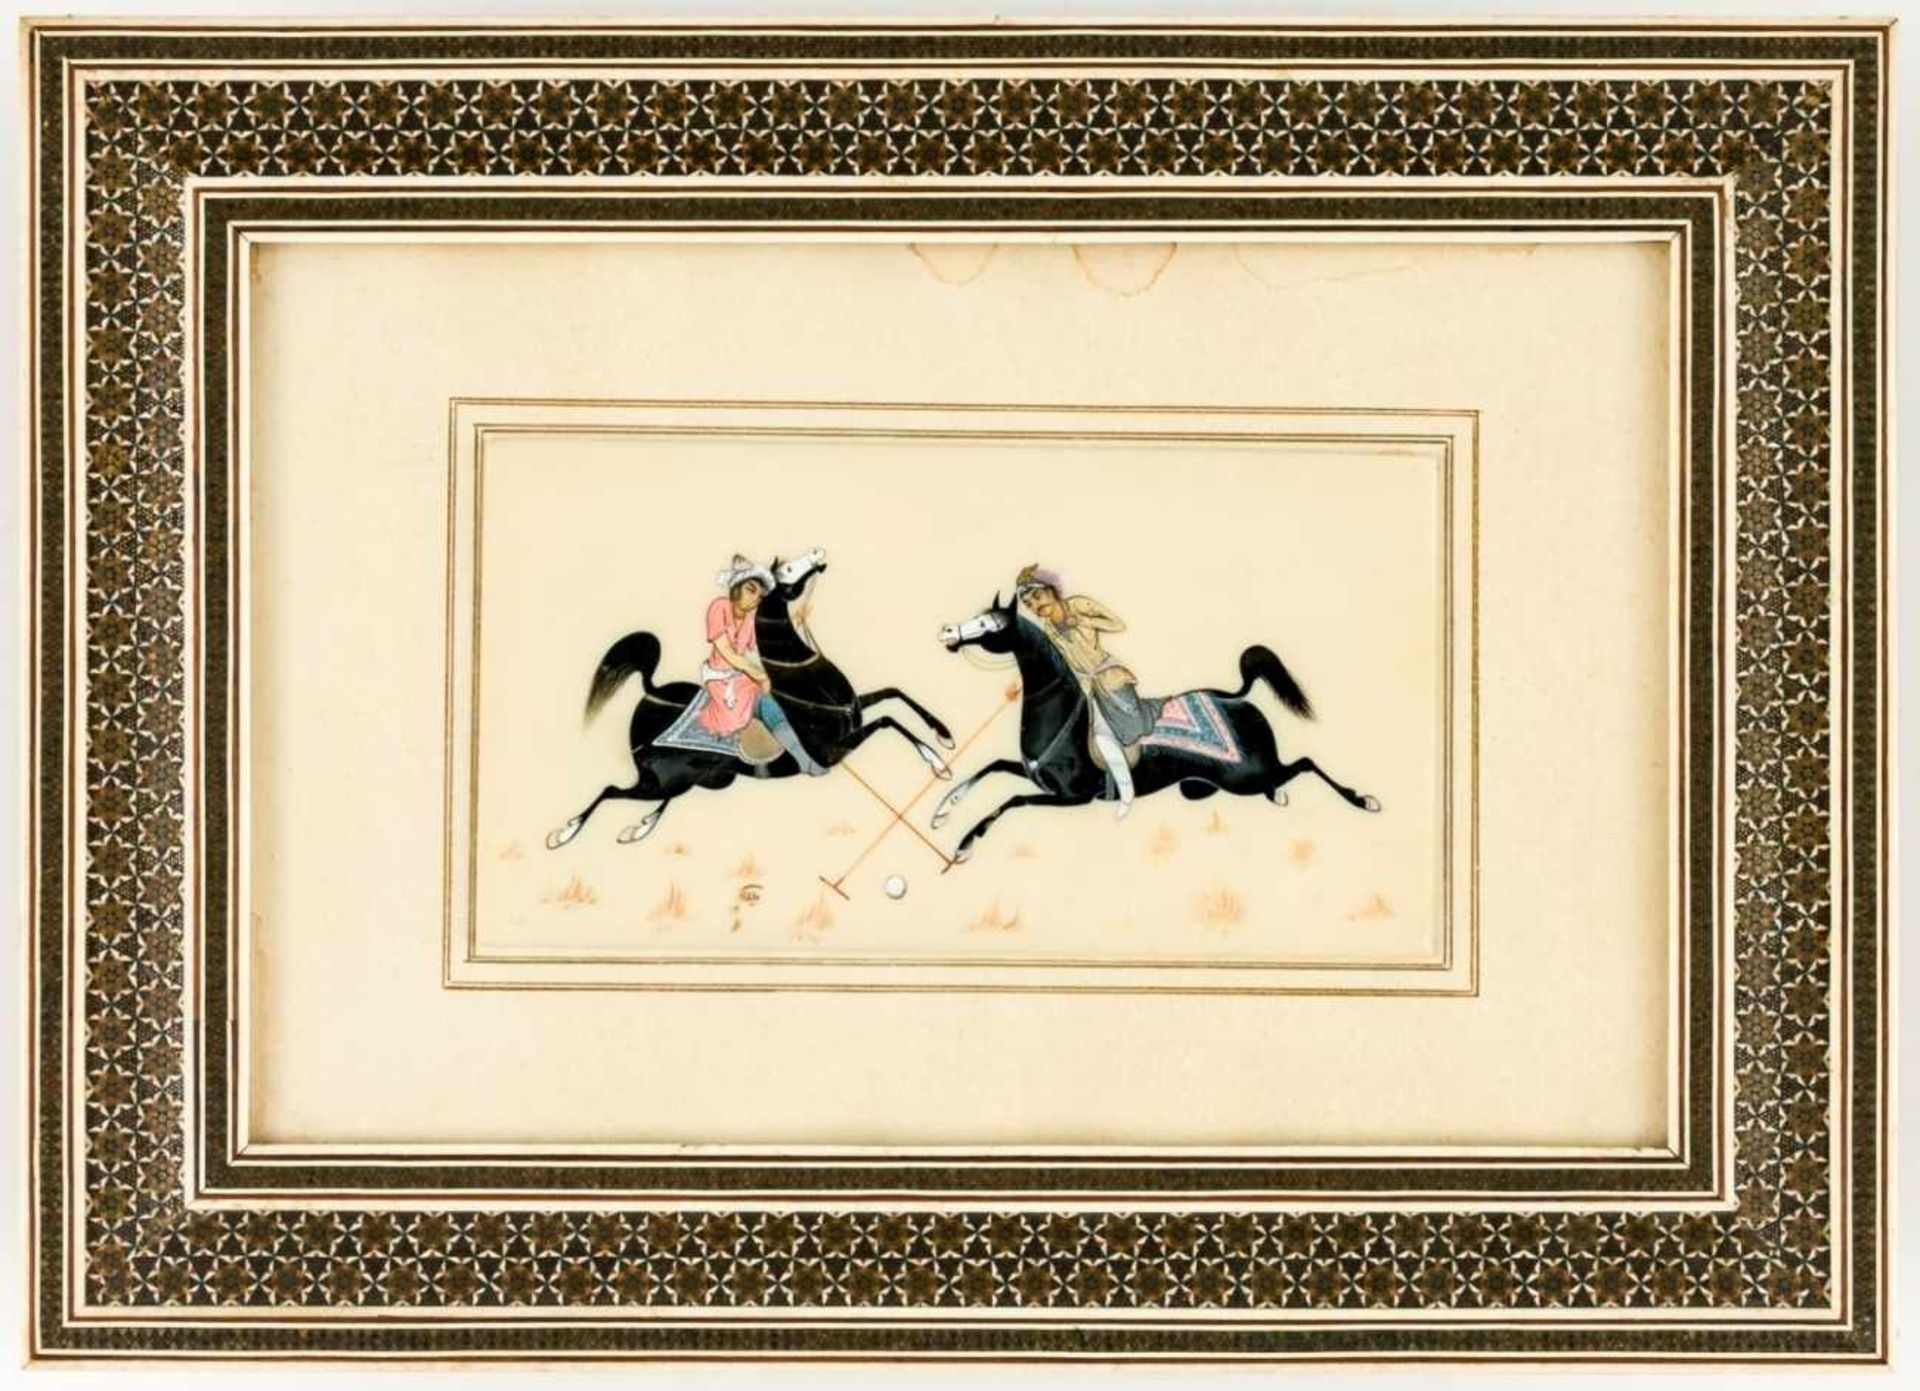 Playing Polo, Persian miniature painting on ivory with inlaid frame, probably early 20thcentury., 10